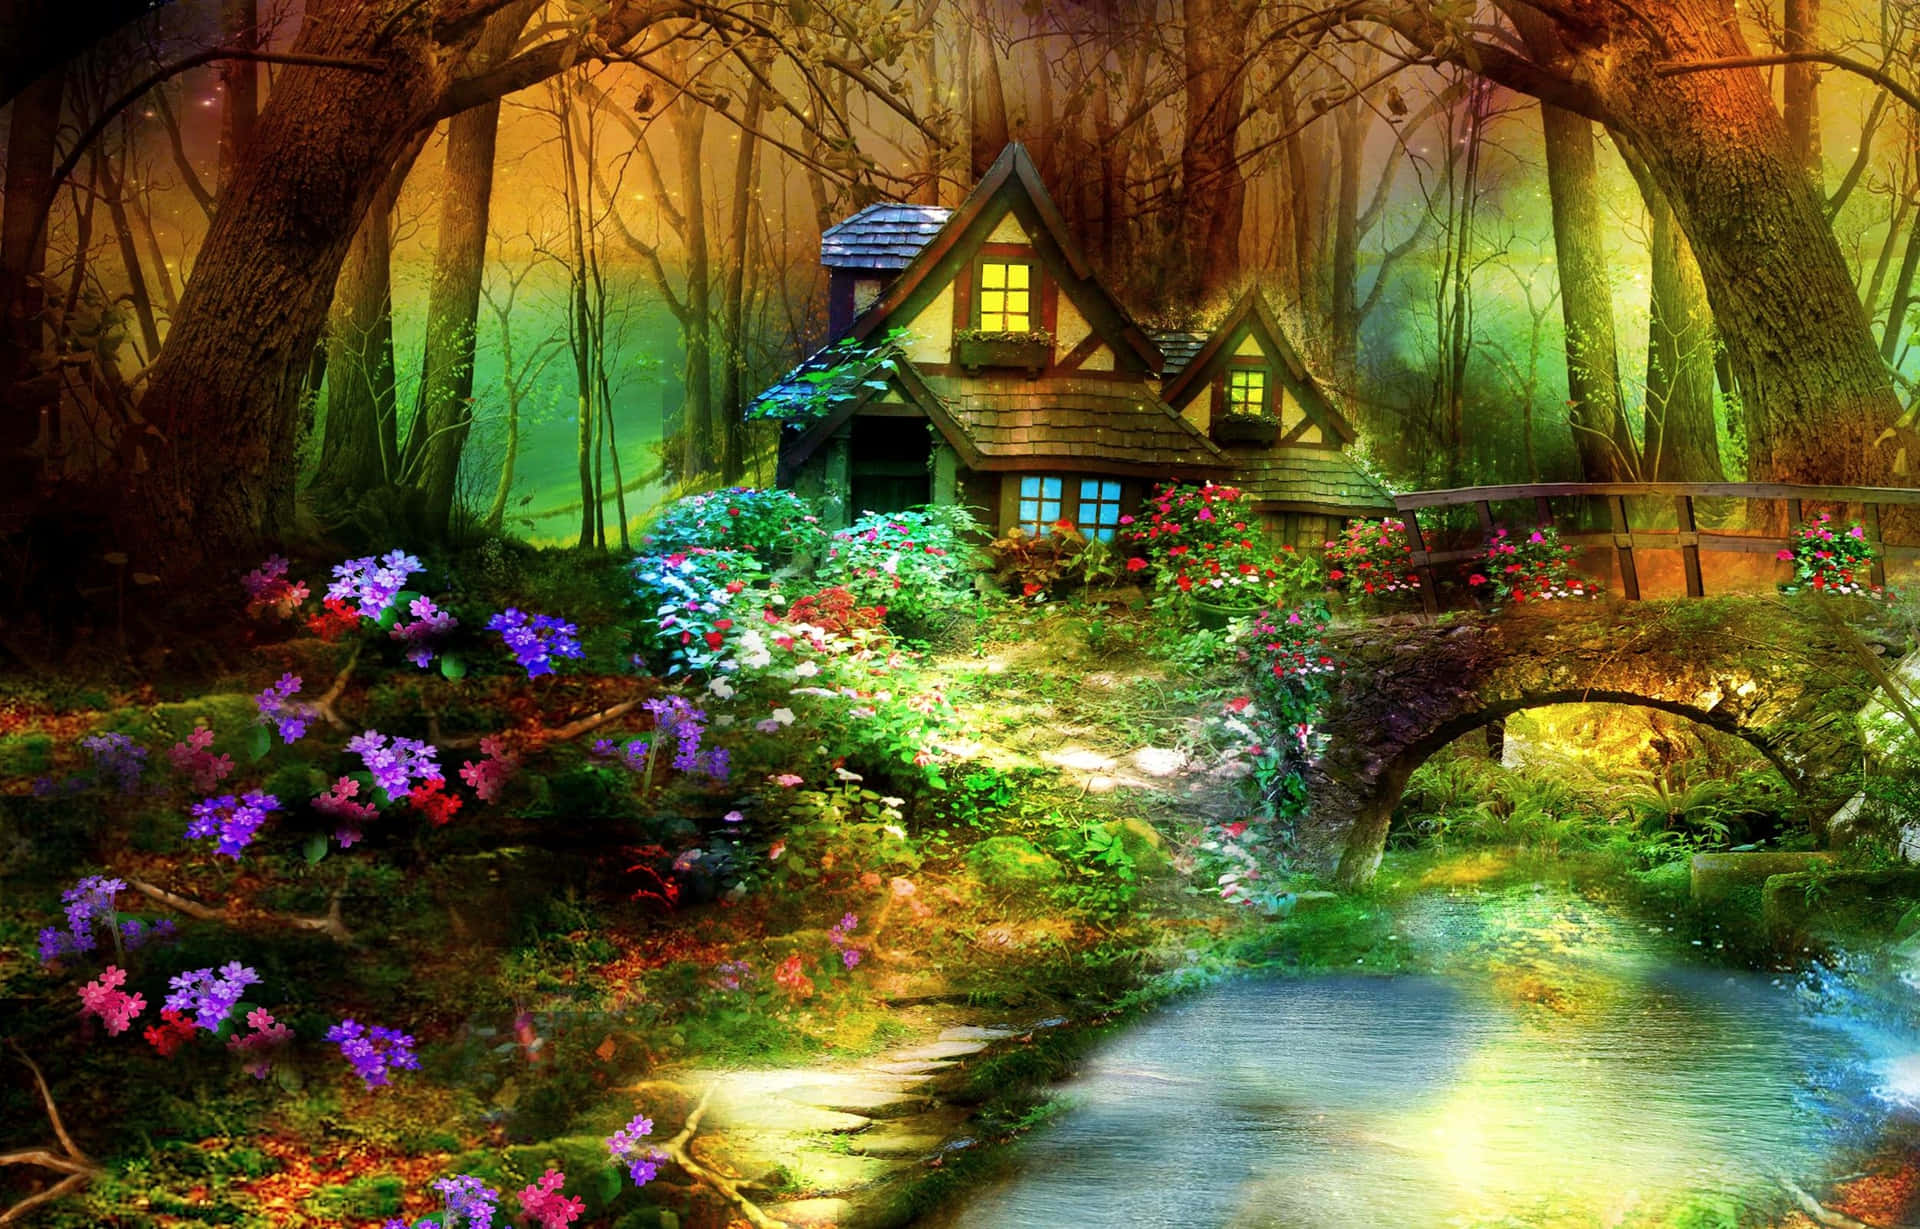 Magical Forest Cottage Wallpaper